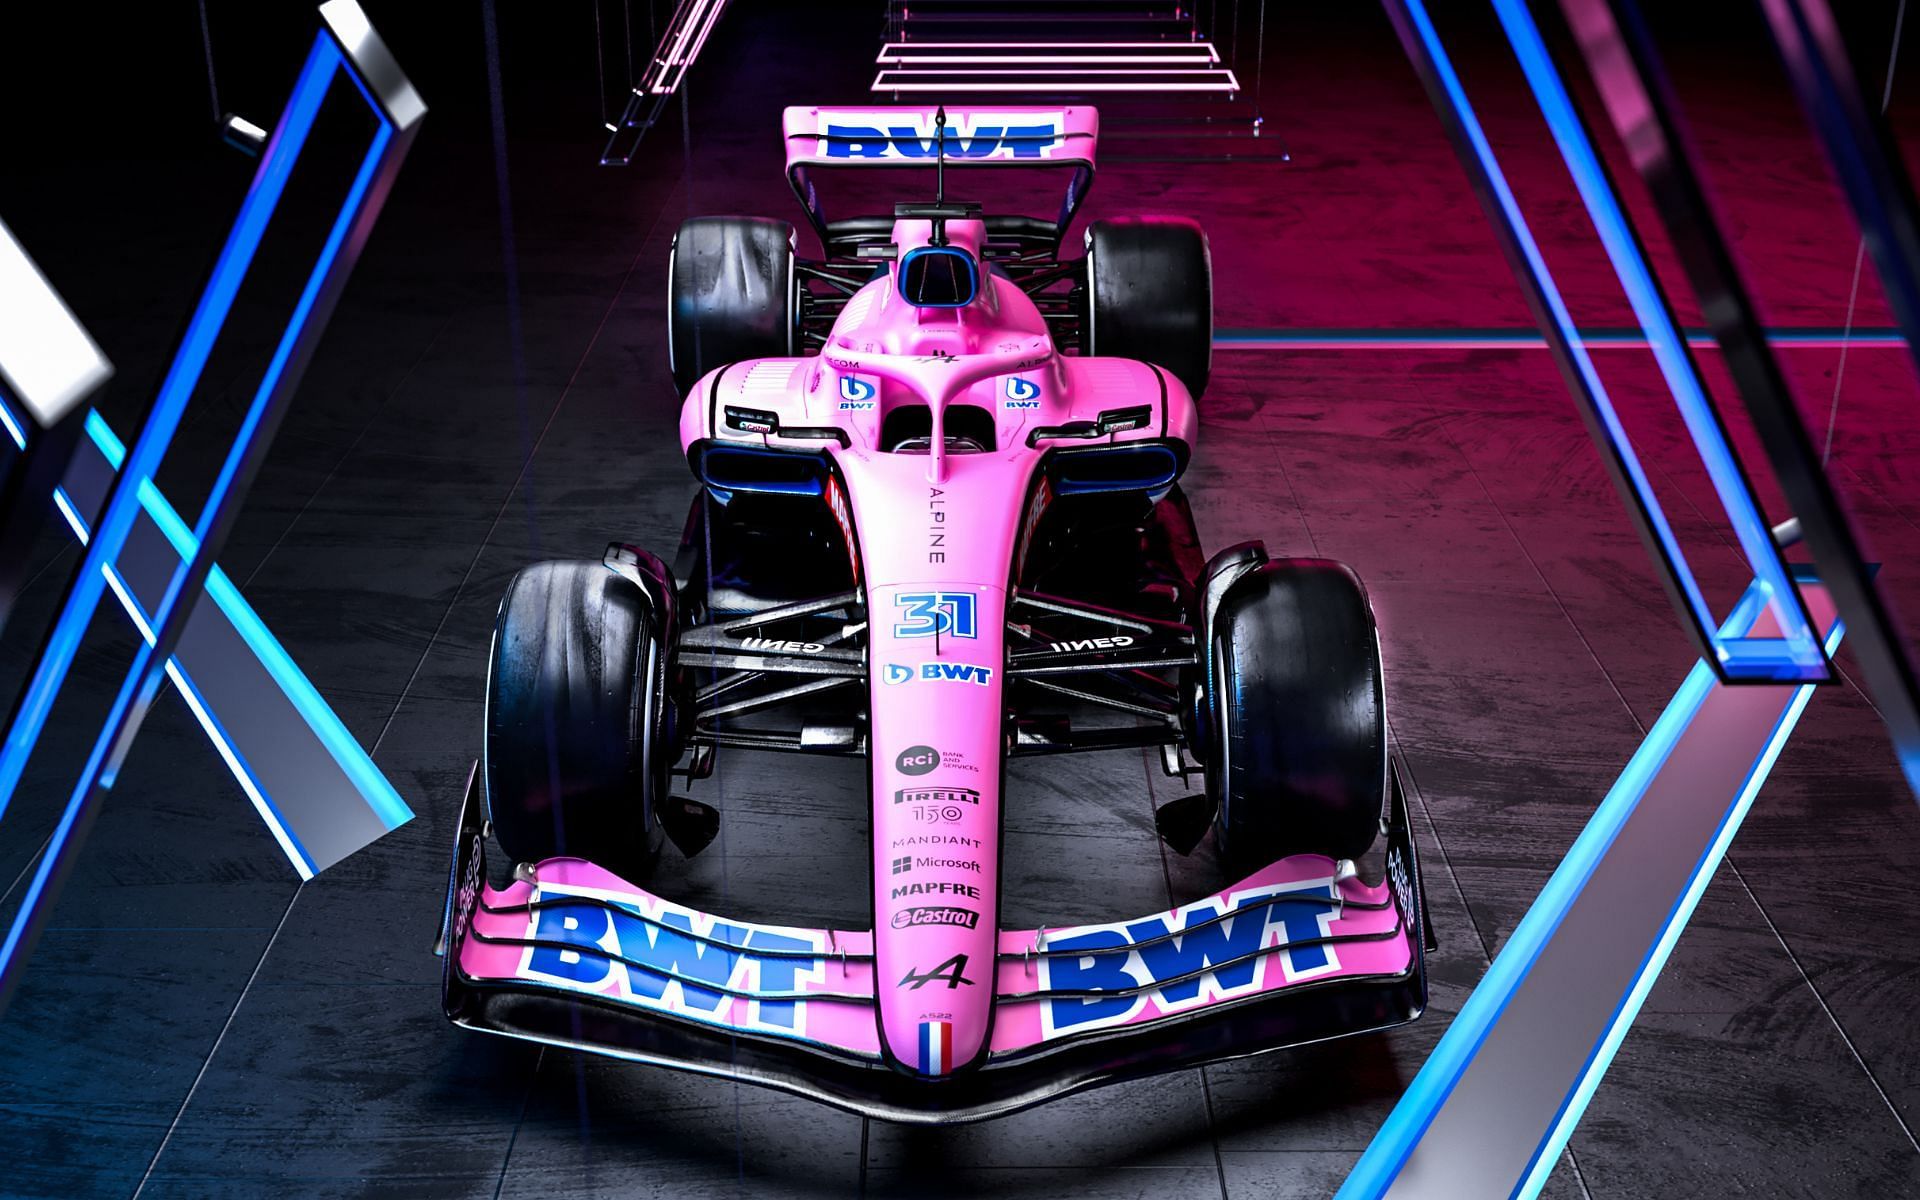 The Alpine A522 in BWT pink livery (Image courtesy: Twitter/AlpineF1)